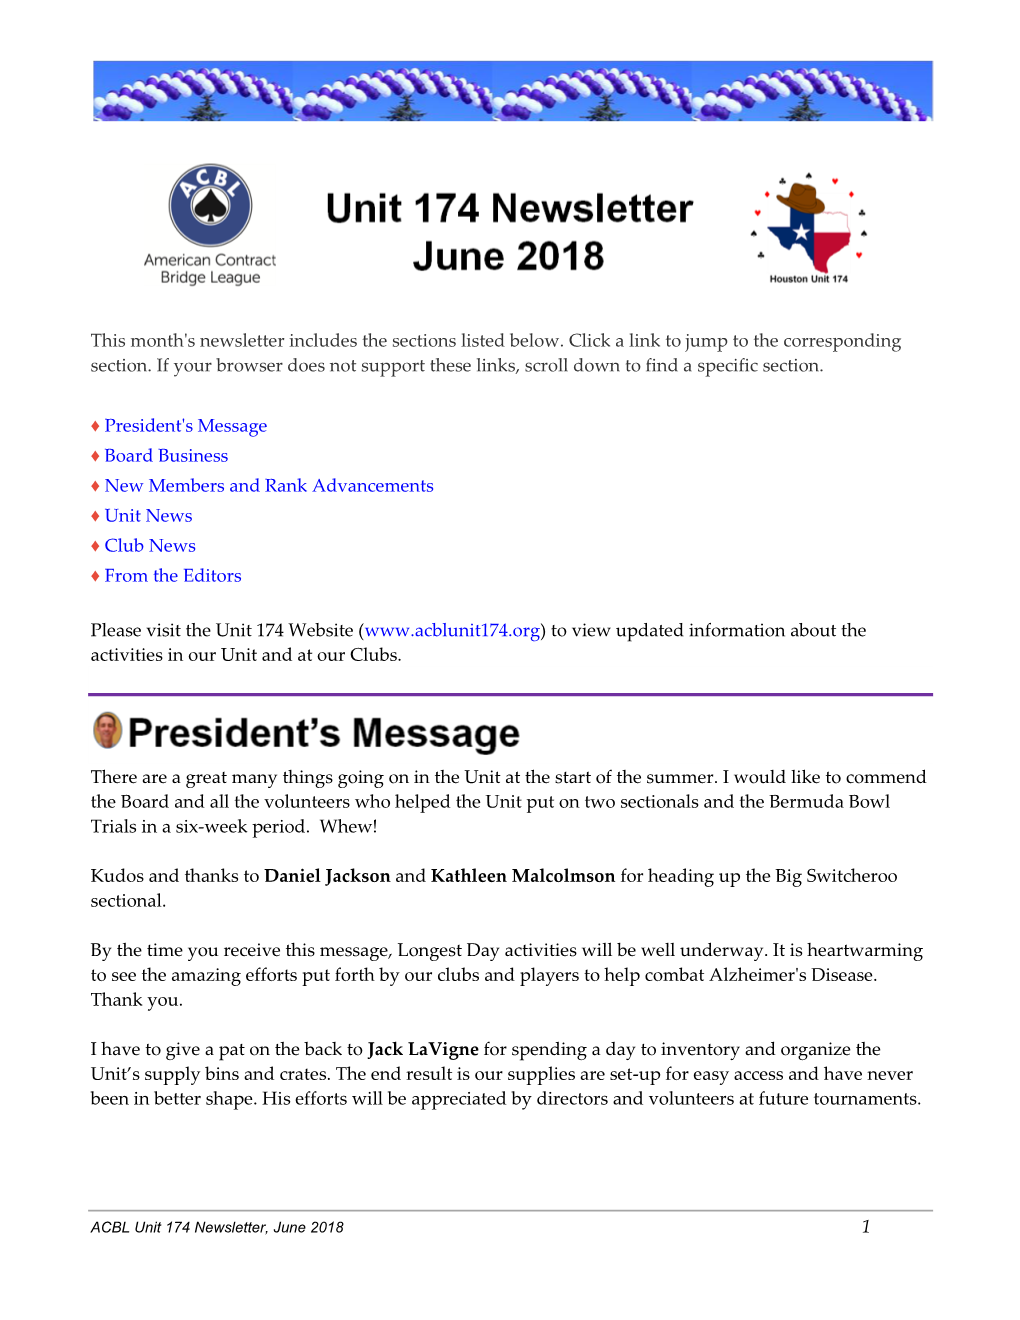 1 This Month's Newsletter Includes the Sections Listed Below. Click a Link To